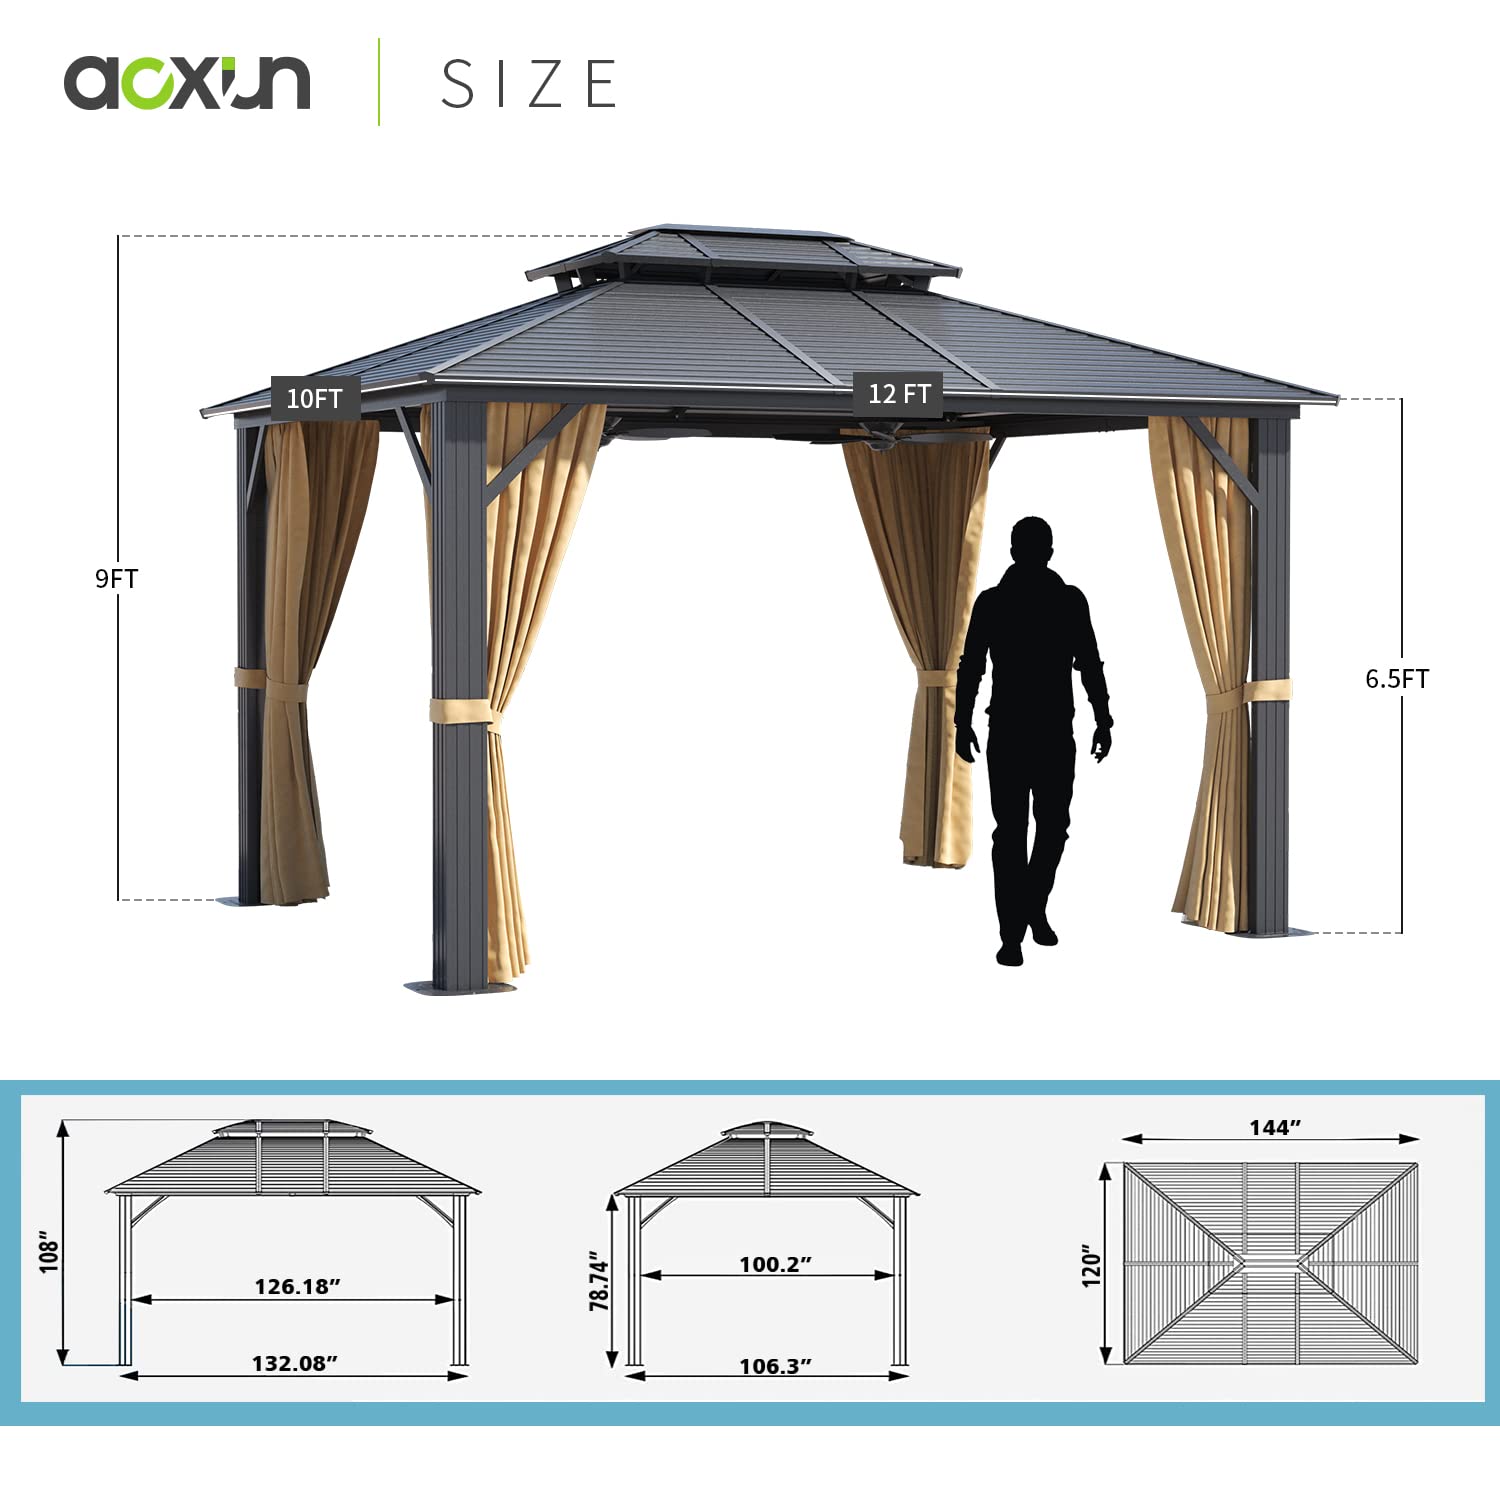 Aoxun 10'x12' Hardtop Gazebo, Outdoor Galvanized Double Roof Gazebo with Aluminum Frame Permanent Pavilion and Curtains & Netting for Backyard, Patio, Deck, Parties (Brown)